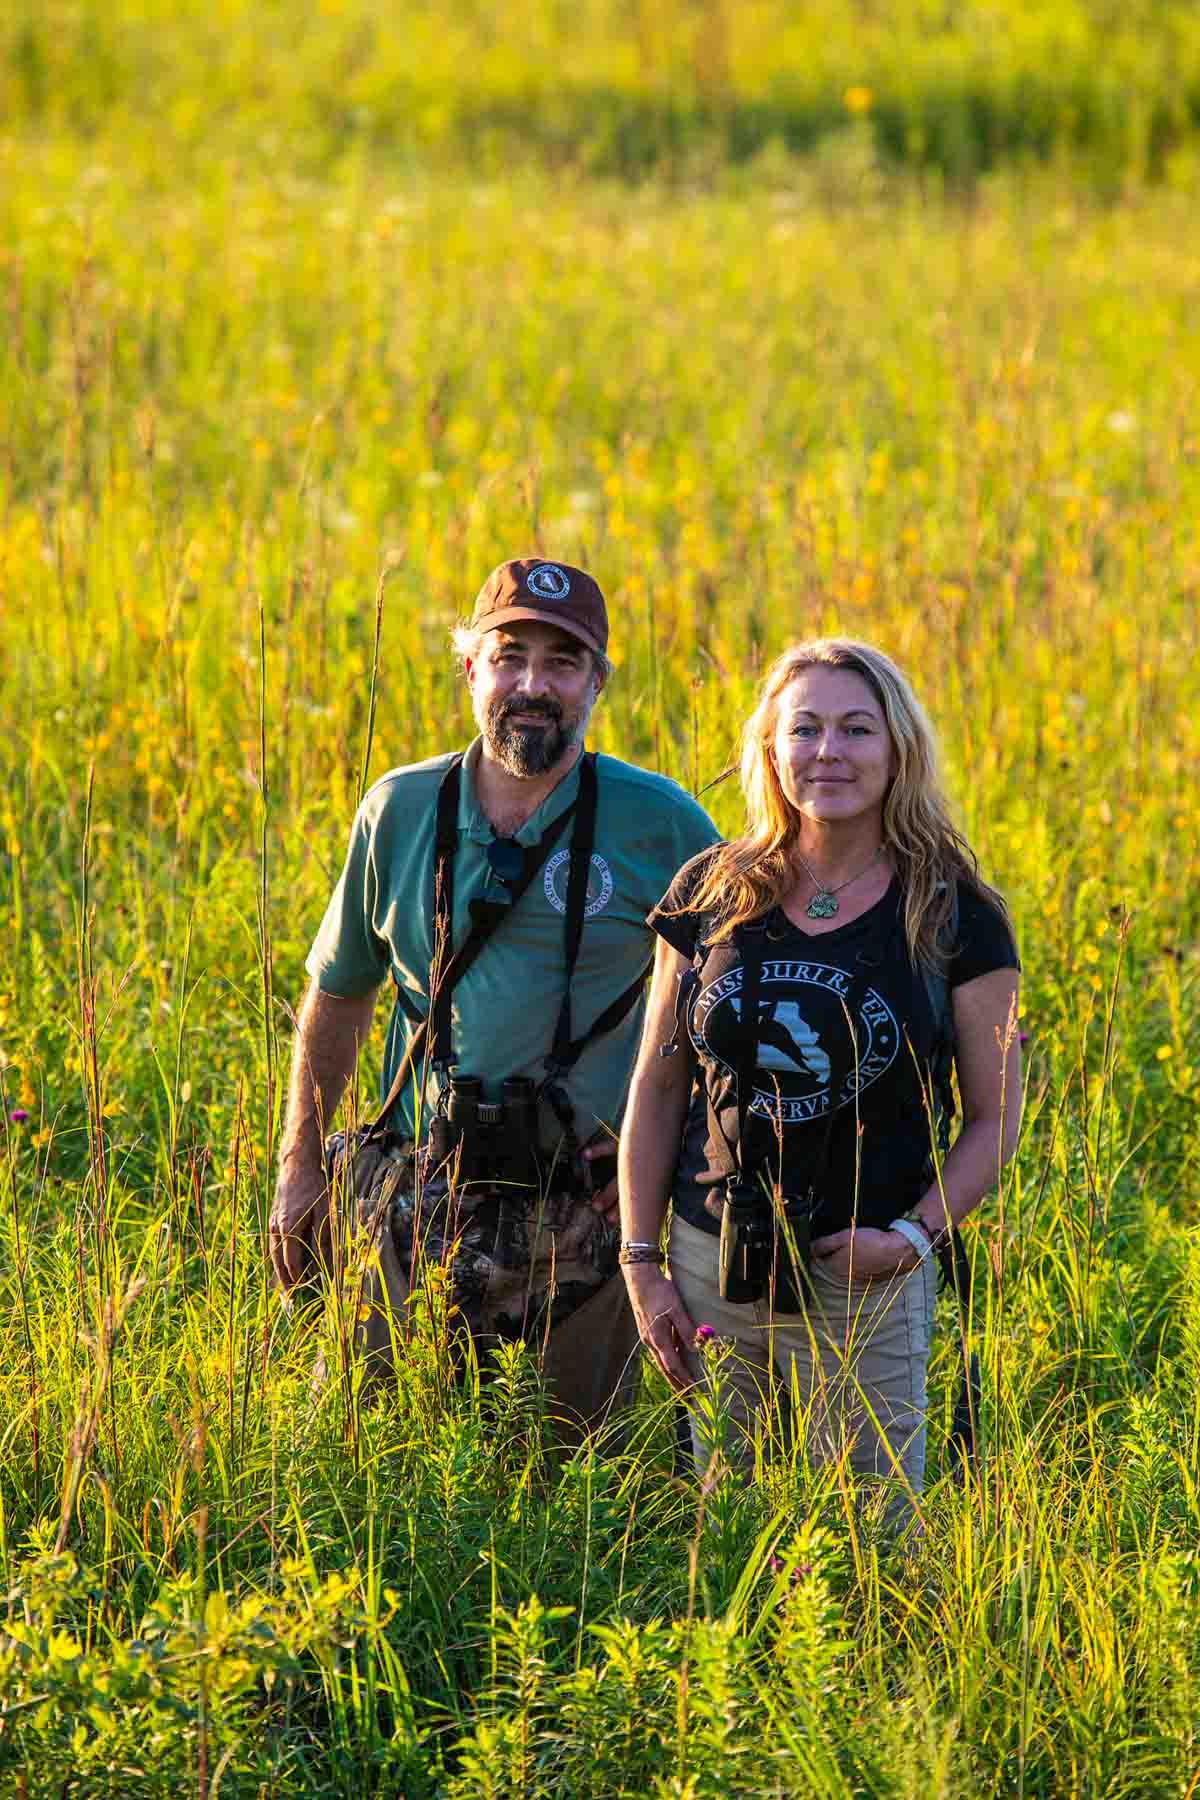 Man and woman standing in a field of tall grass